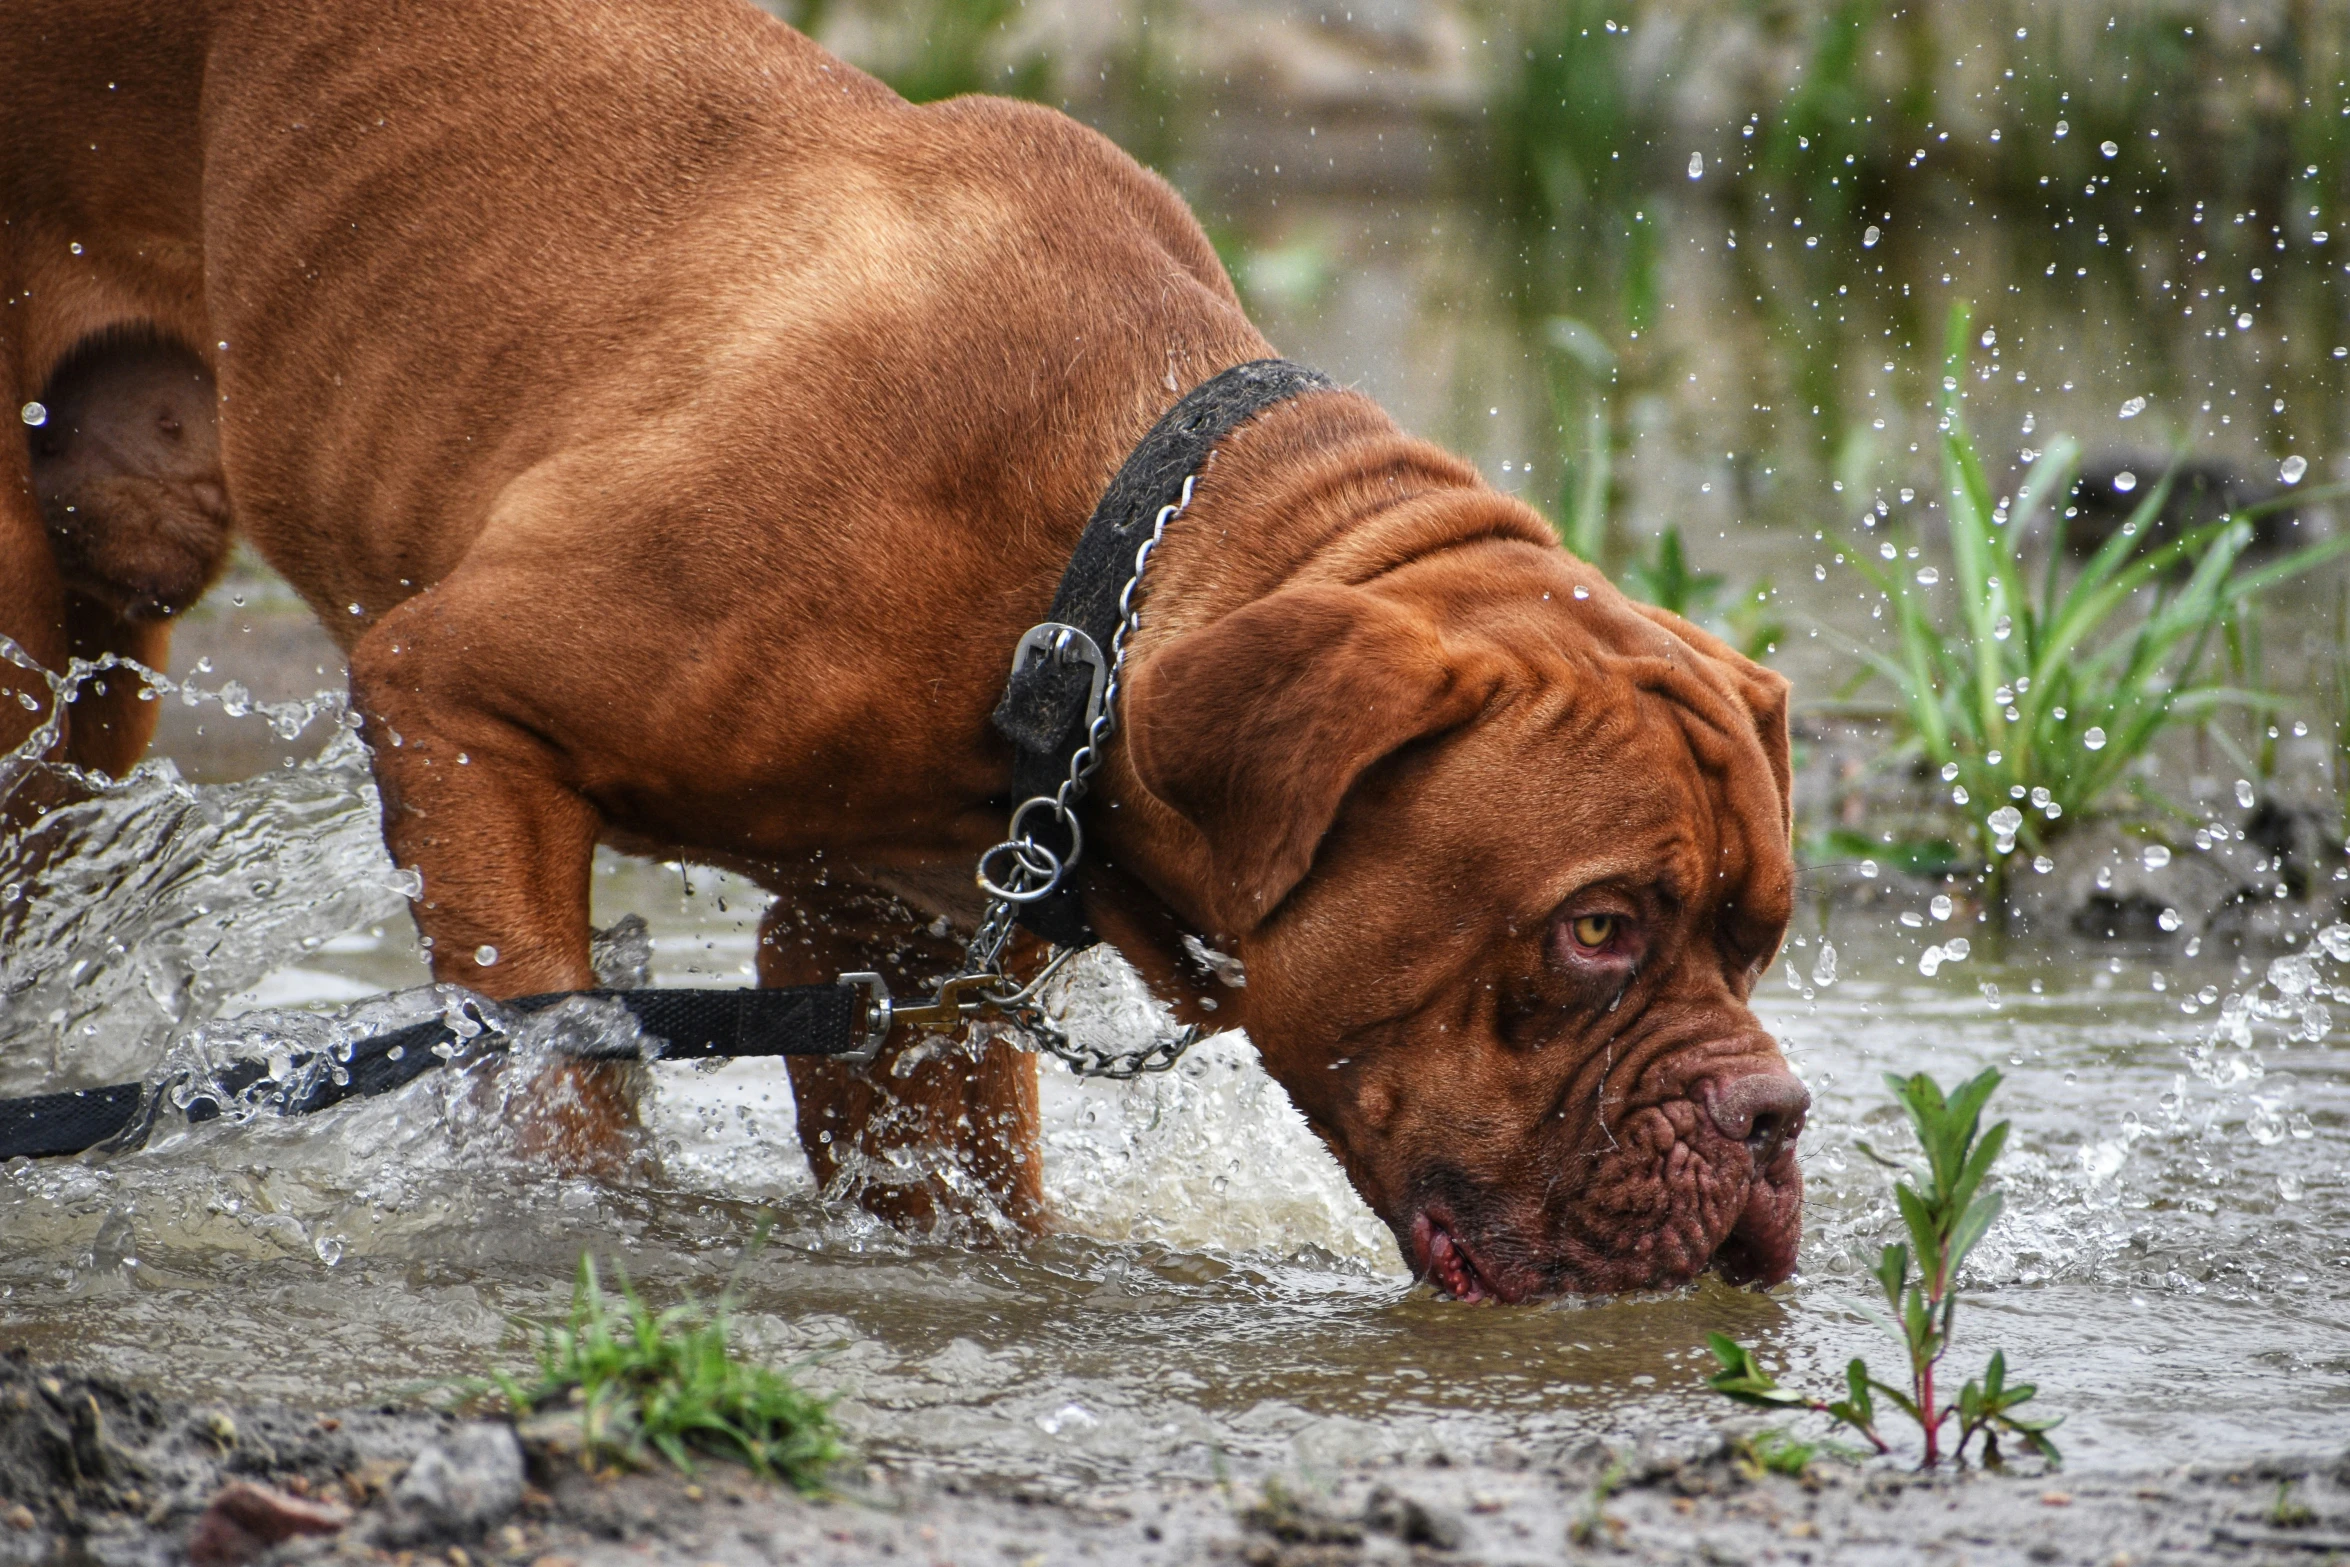 a dog walking in water near grass and rocks